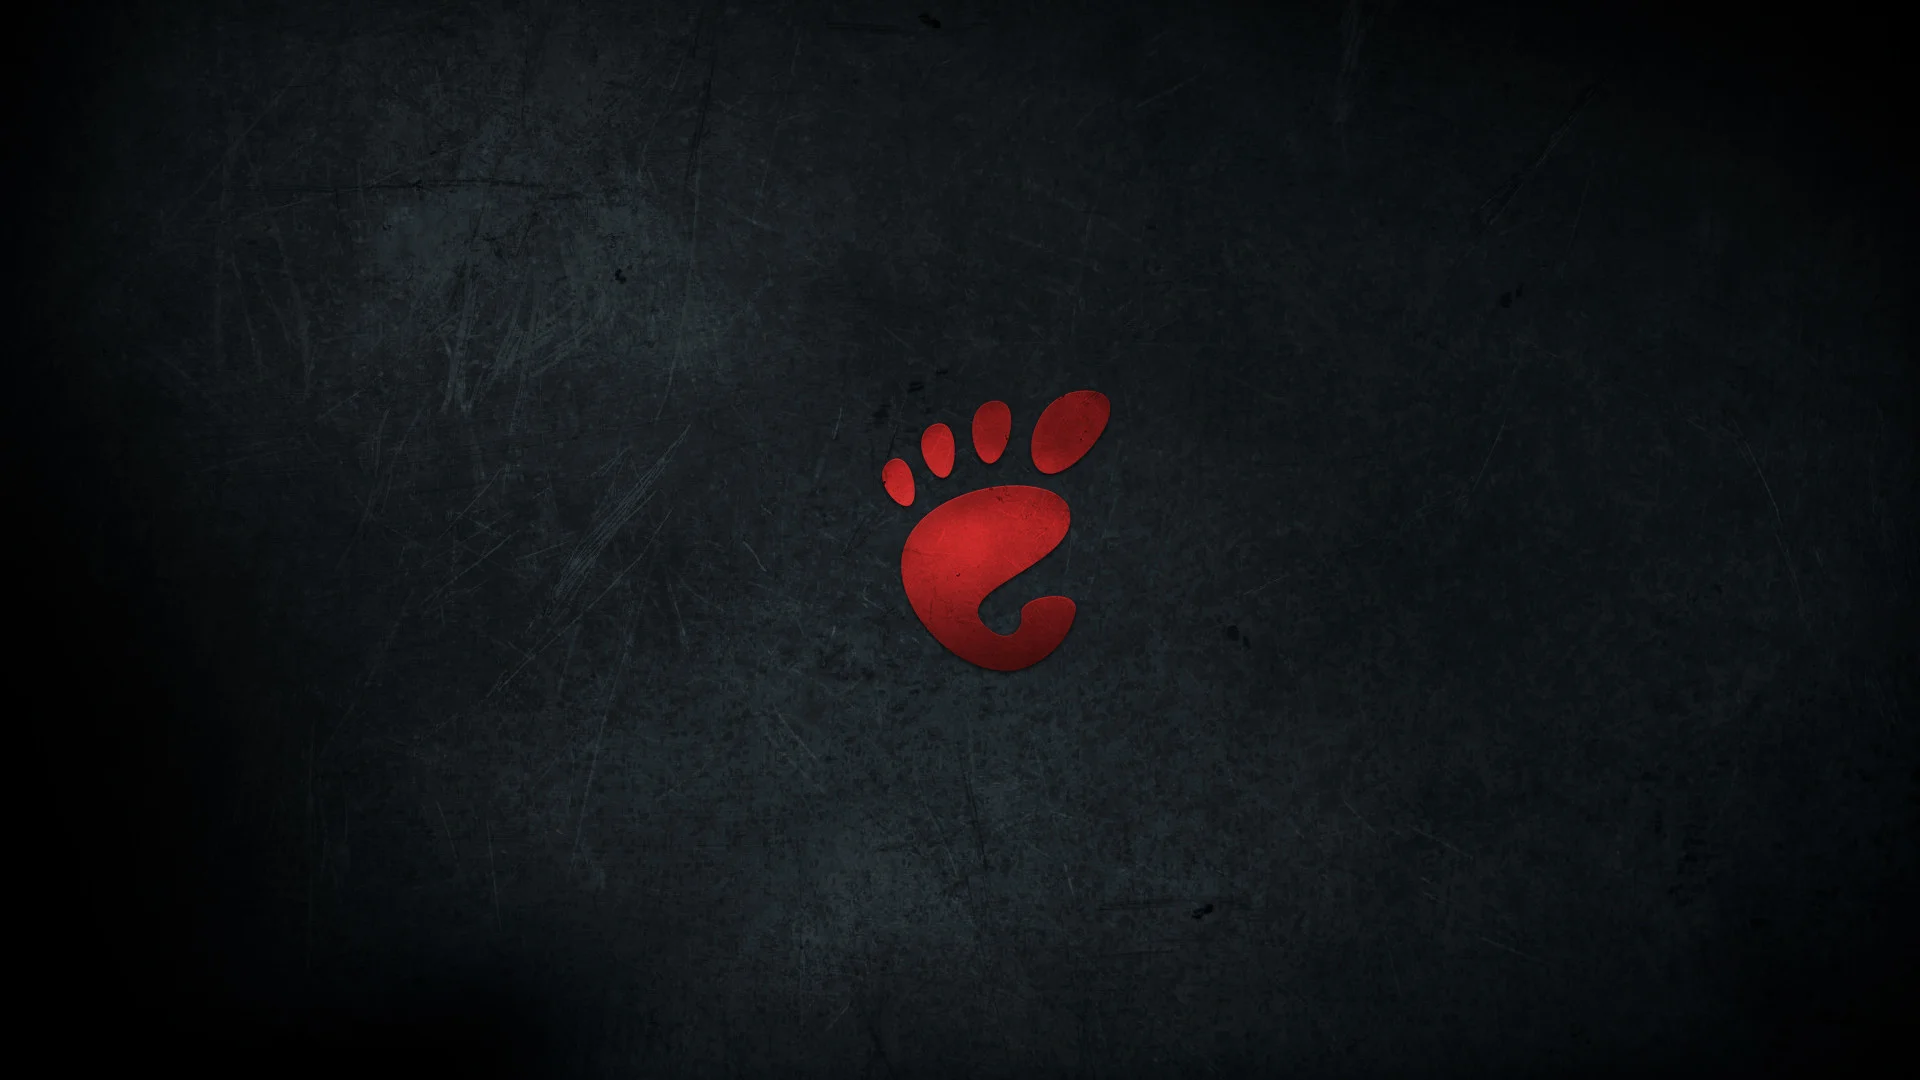 … Gnome Dark Wallpaper – Red by malkowitch